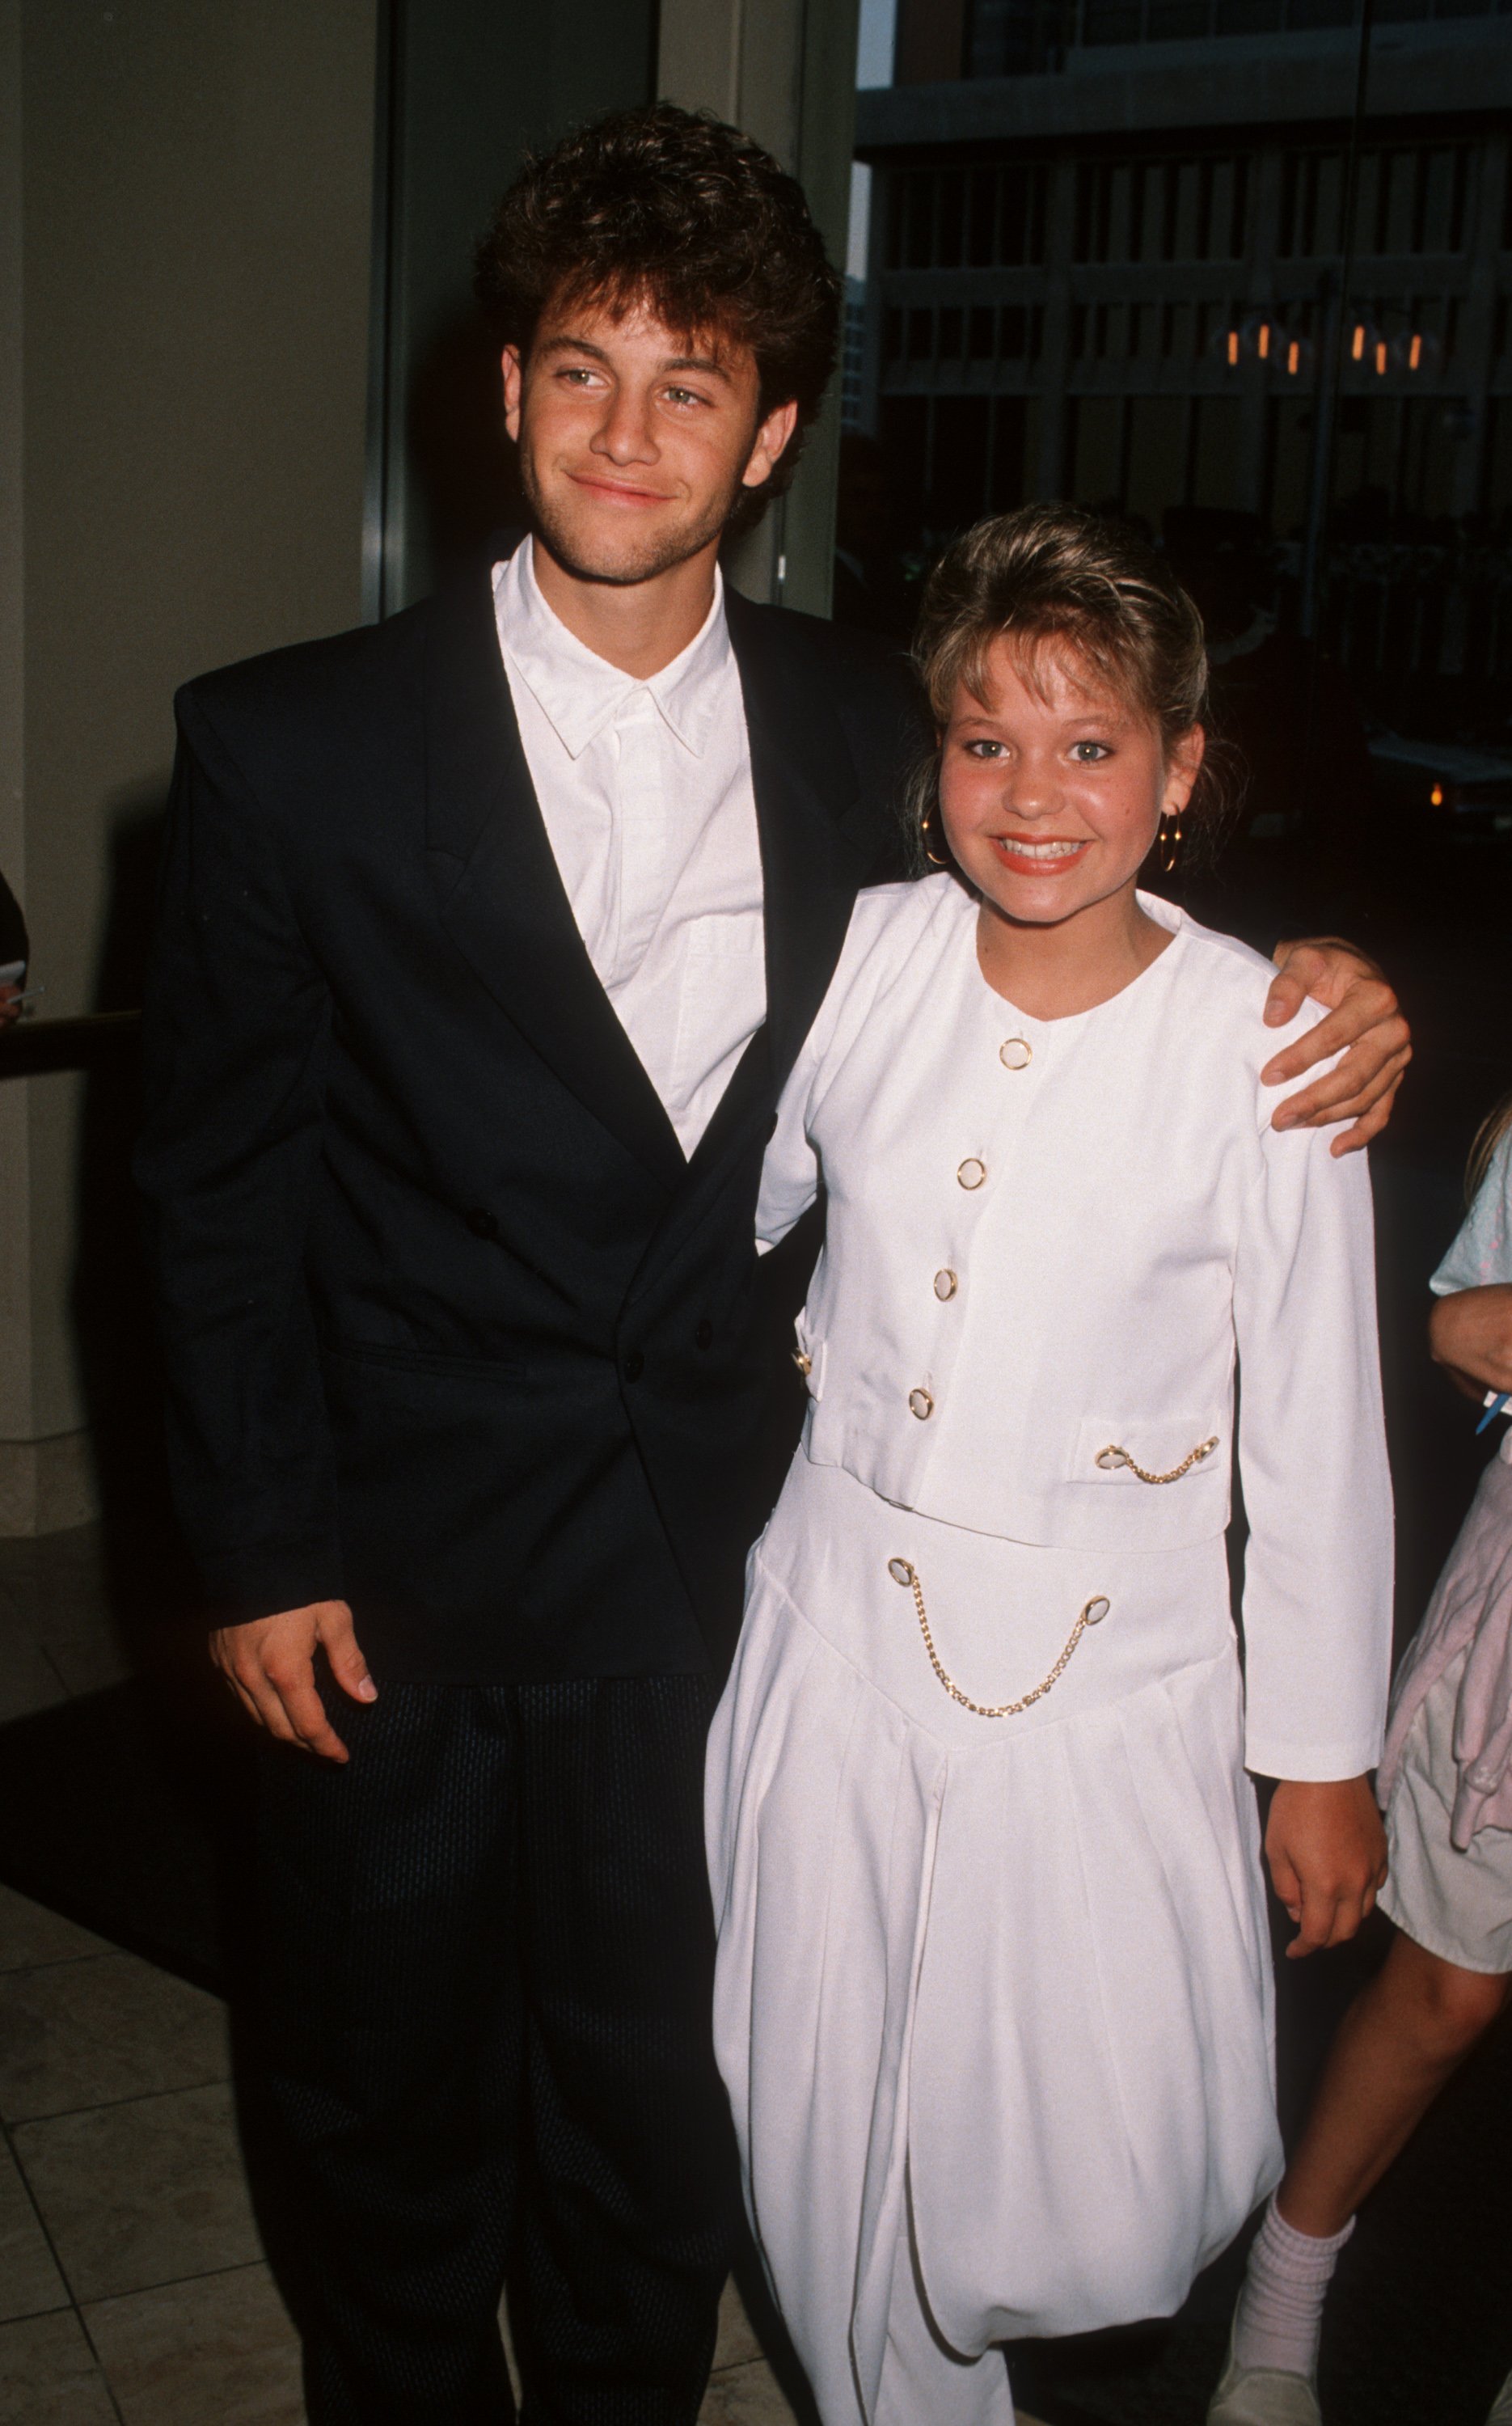  Kirk Cameron and Candace Cameron Bure attending ABC Convention on June 14, 1990 in California | Source: Getty Images 